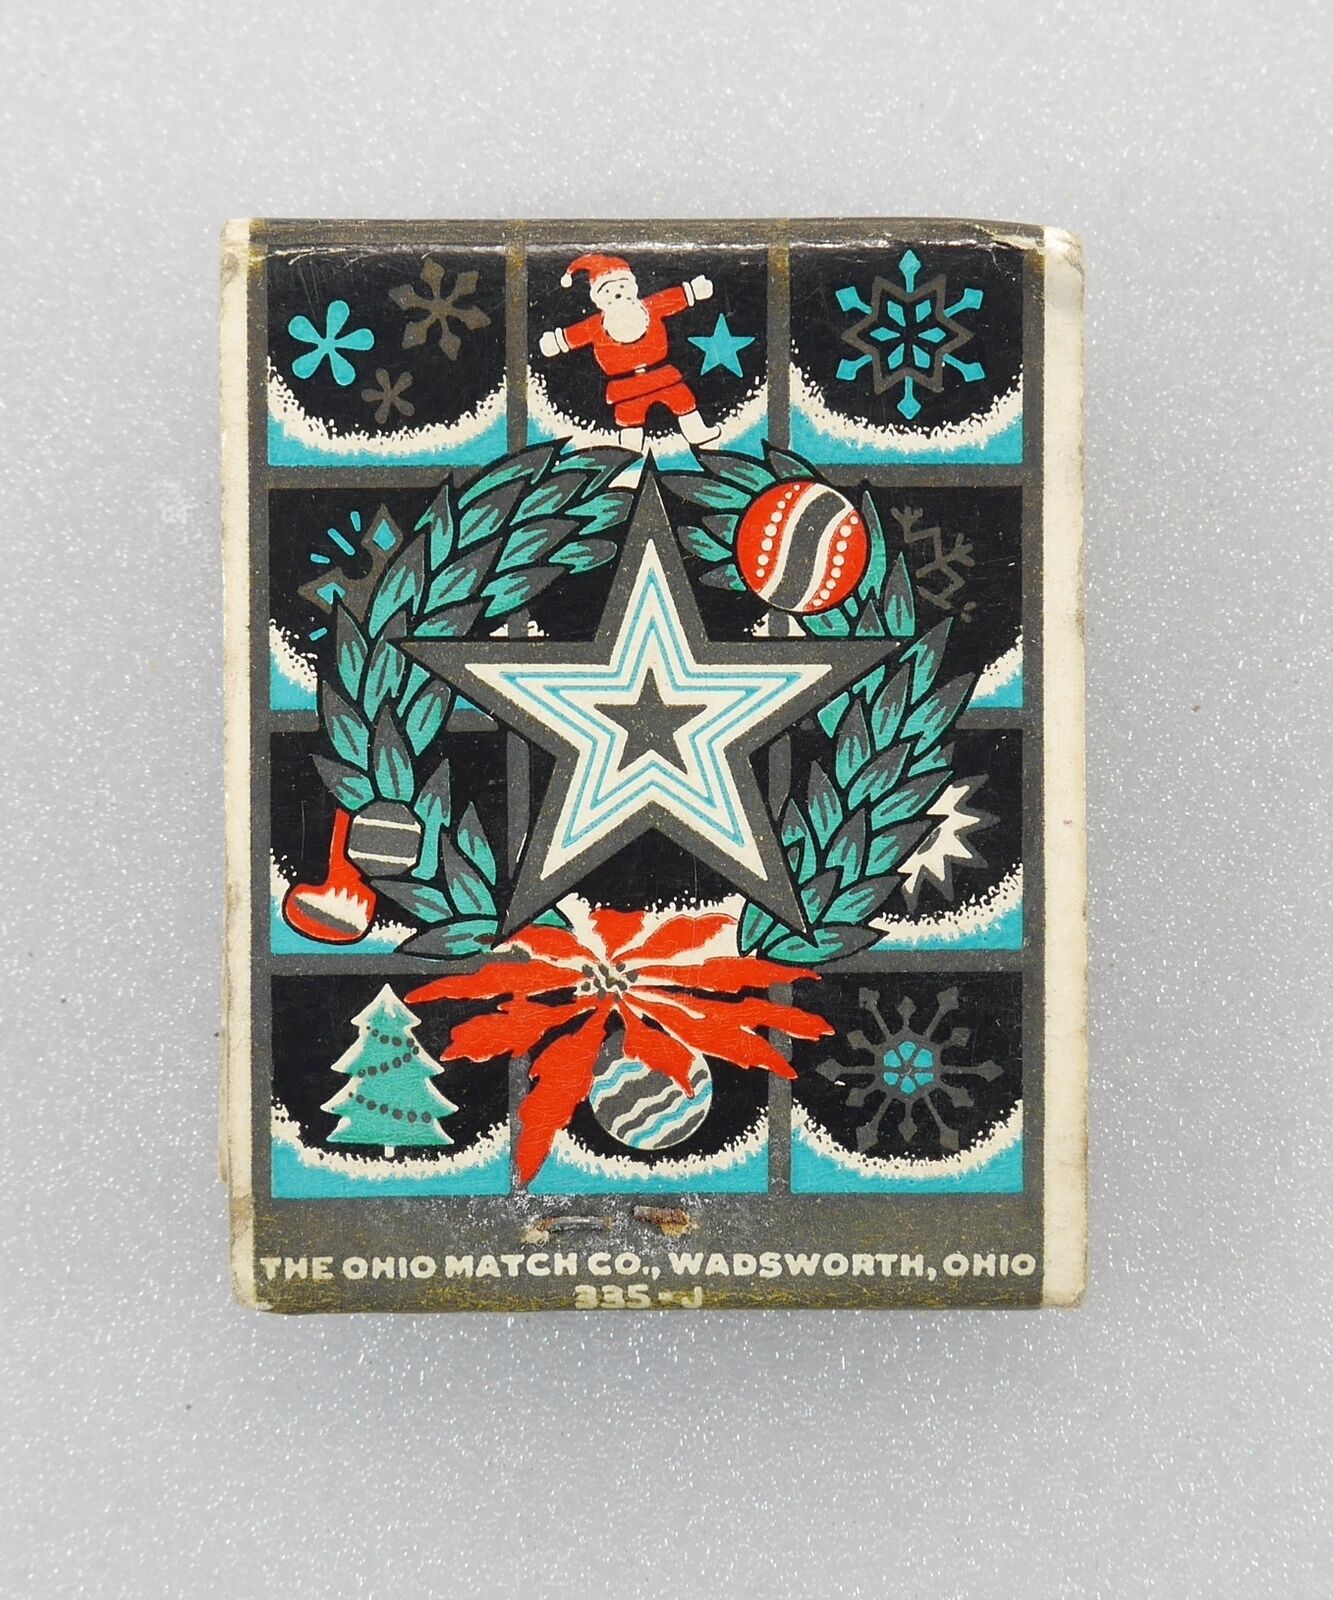 Del Rio Bank & Trust Company Seasons Greetings Holiday Matchbook Cover Struck